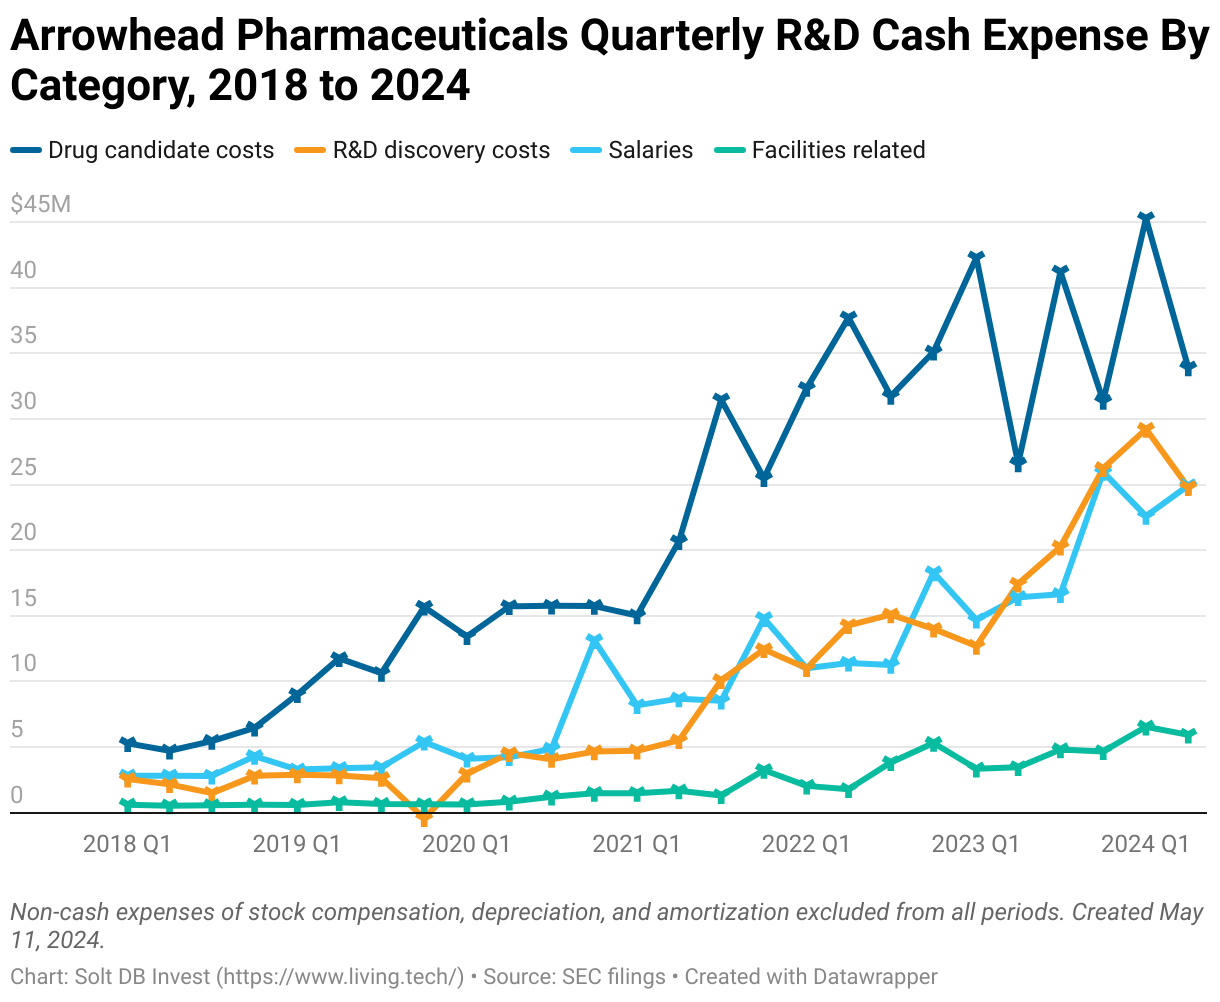 A line chart showing R and D expenses of Arrowhead Pharmaceuticals broken down by drug discovery, clinical development, salaries, and facilities from Q1 2018 to Q2 2024.